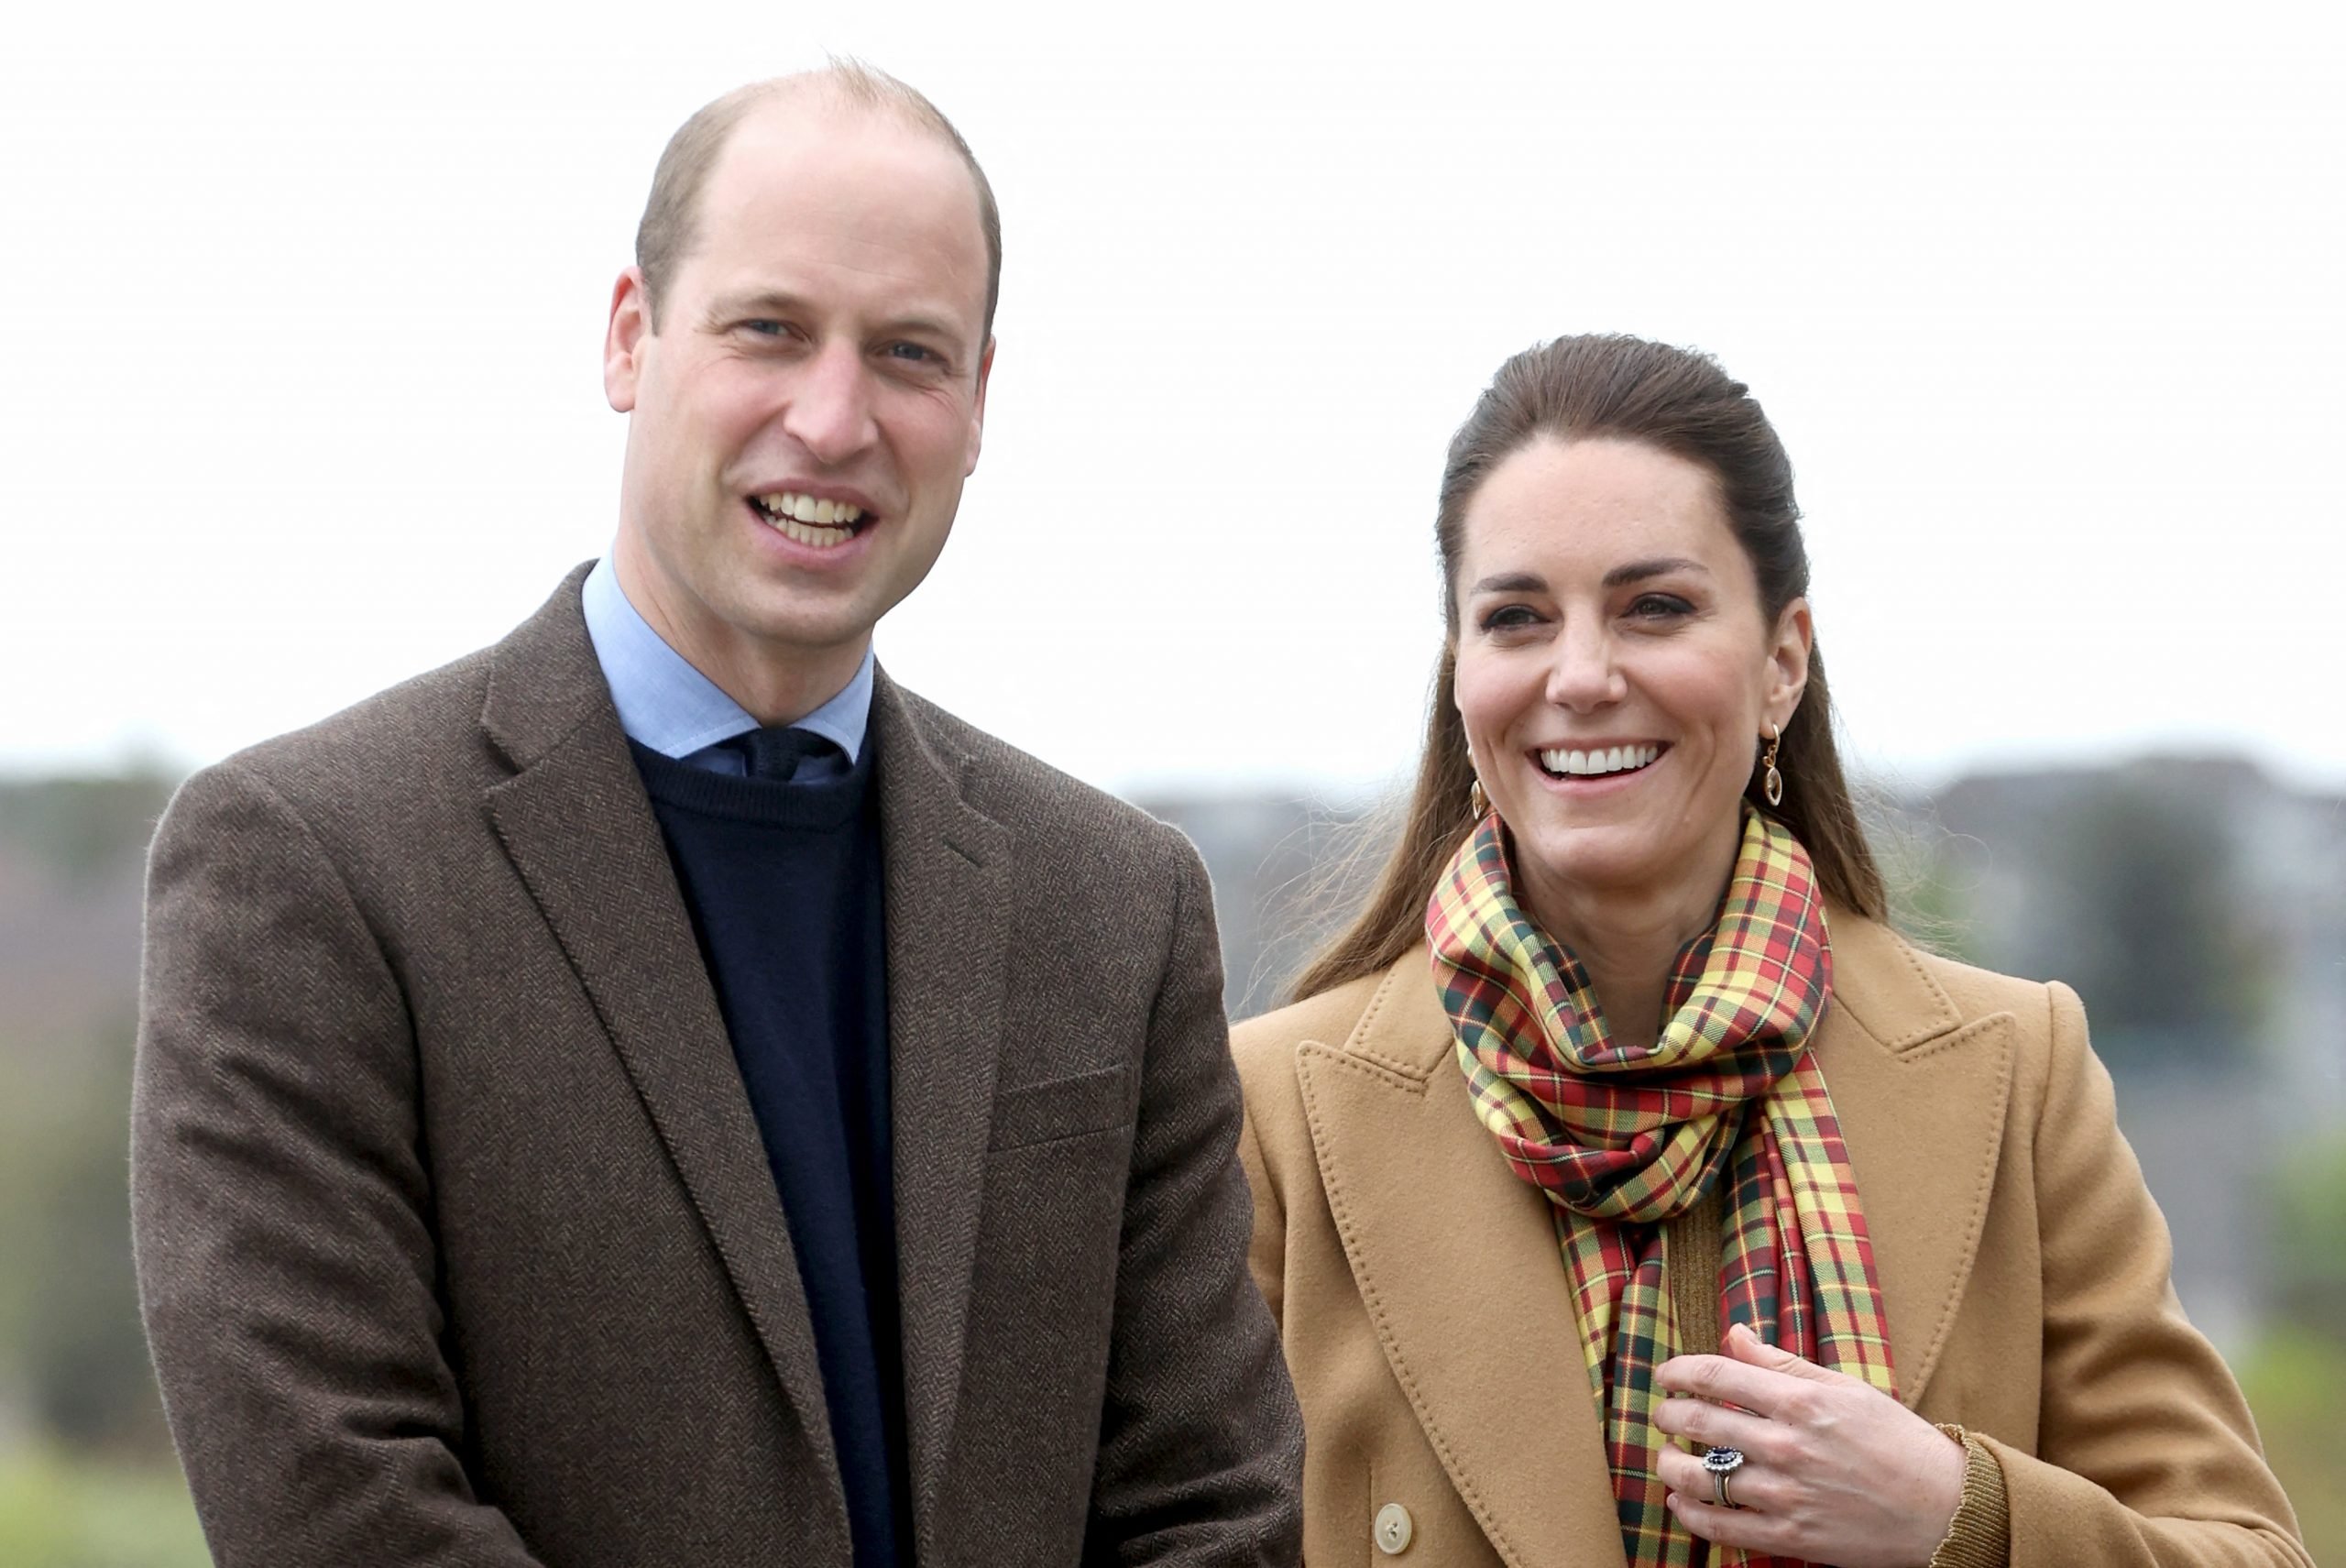 Kate Middleton and Prince William laugh at a photocall